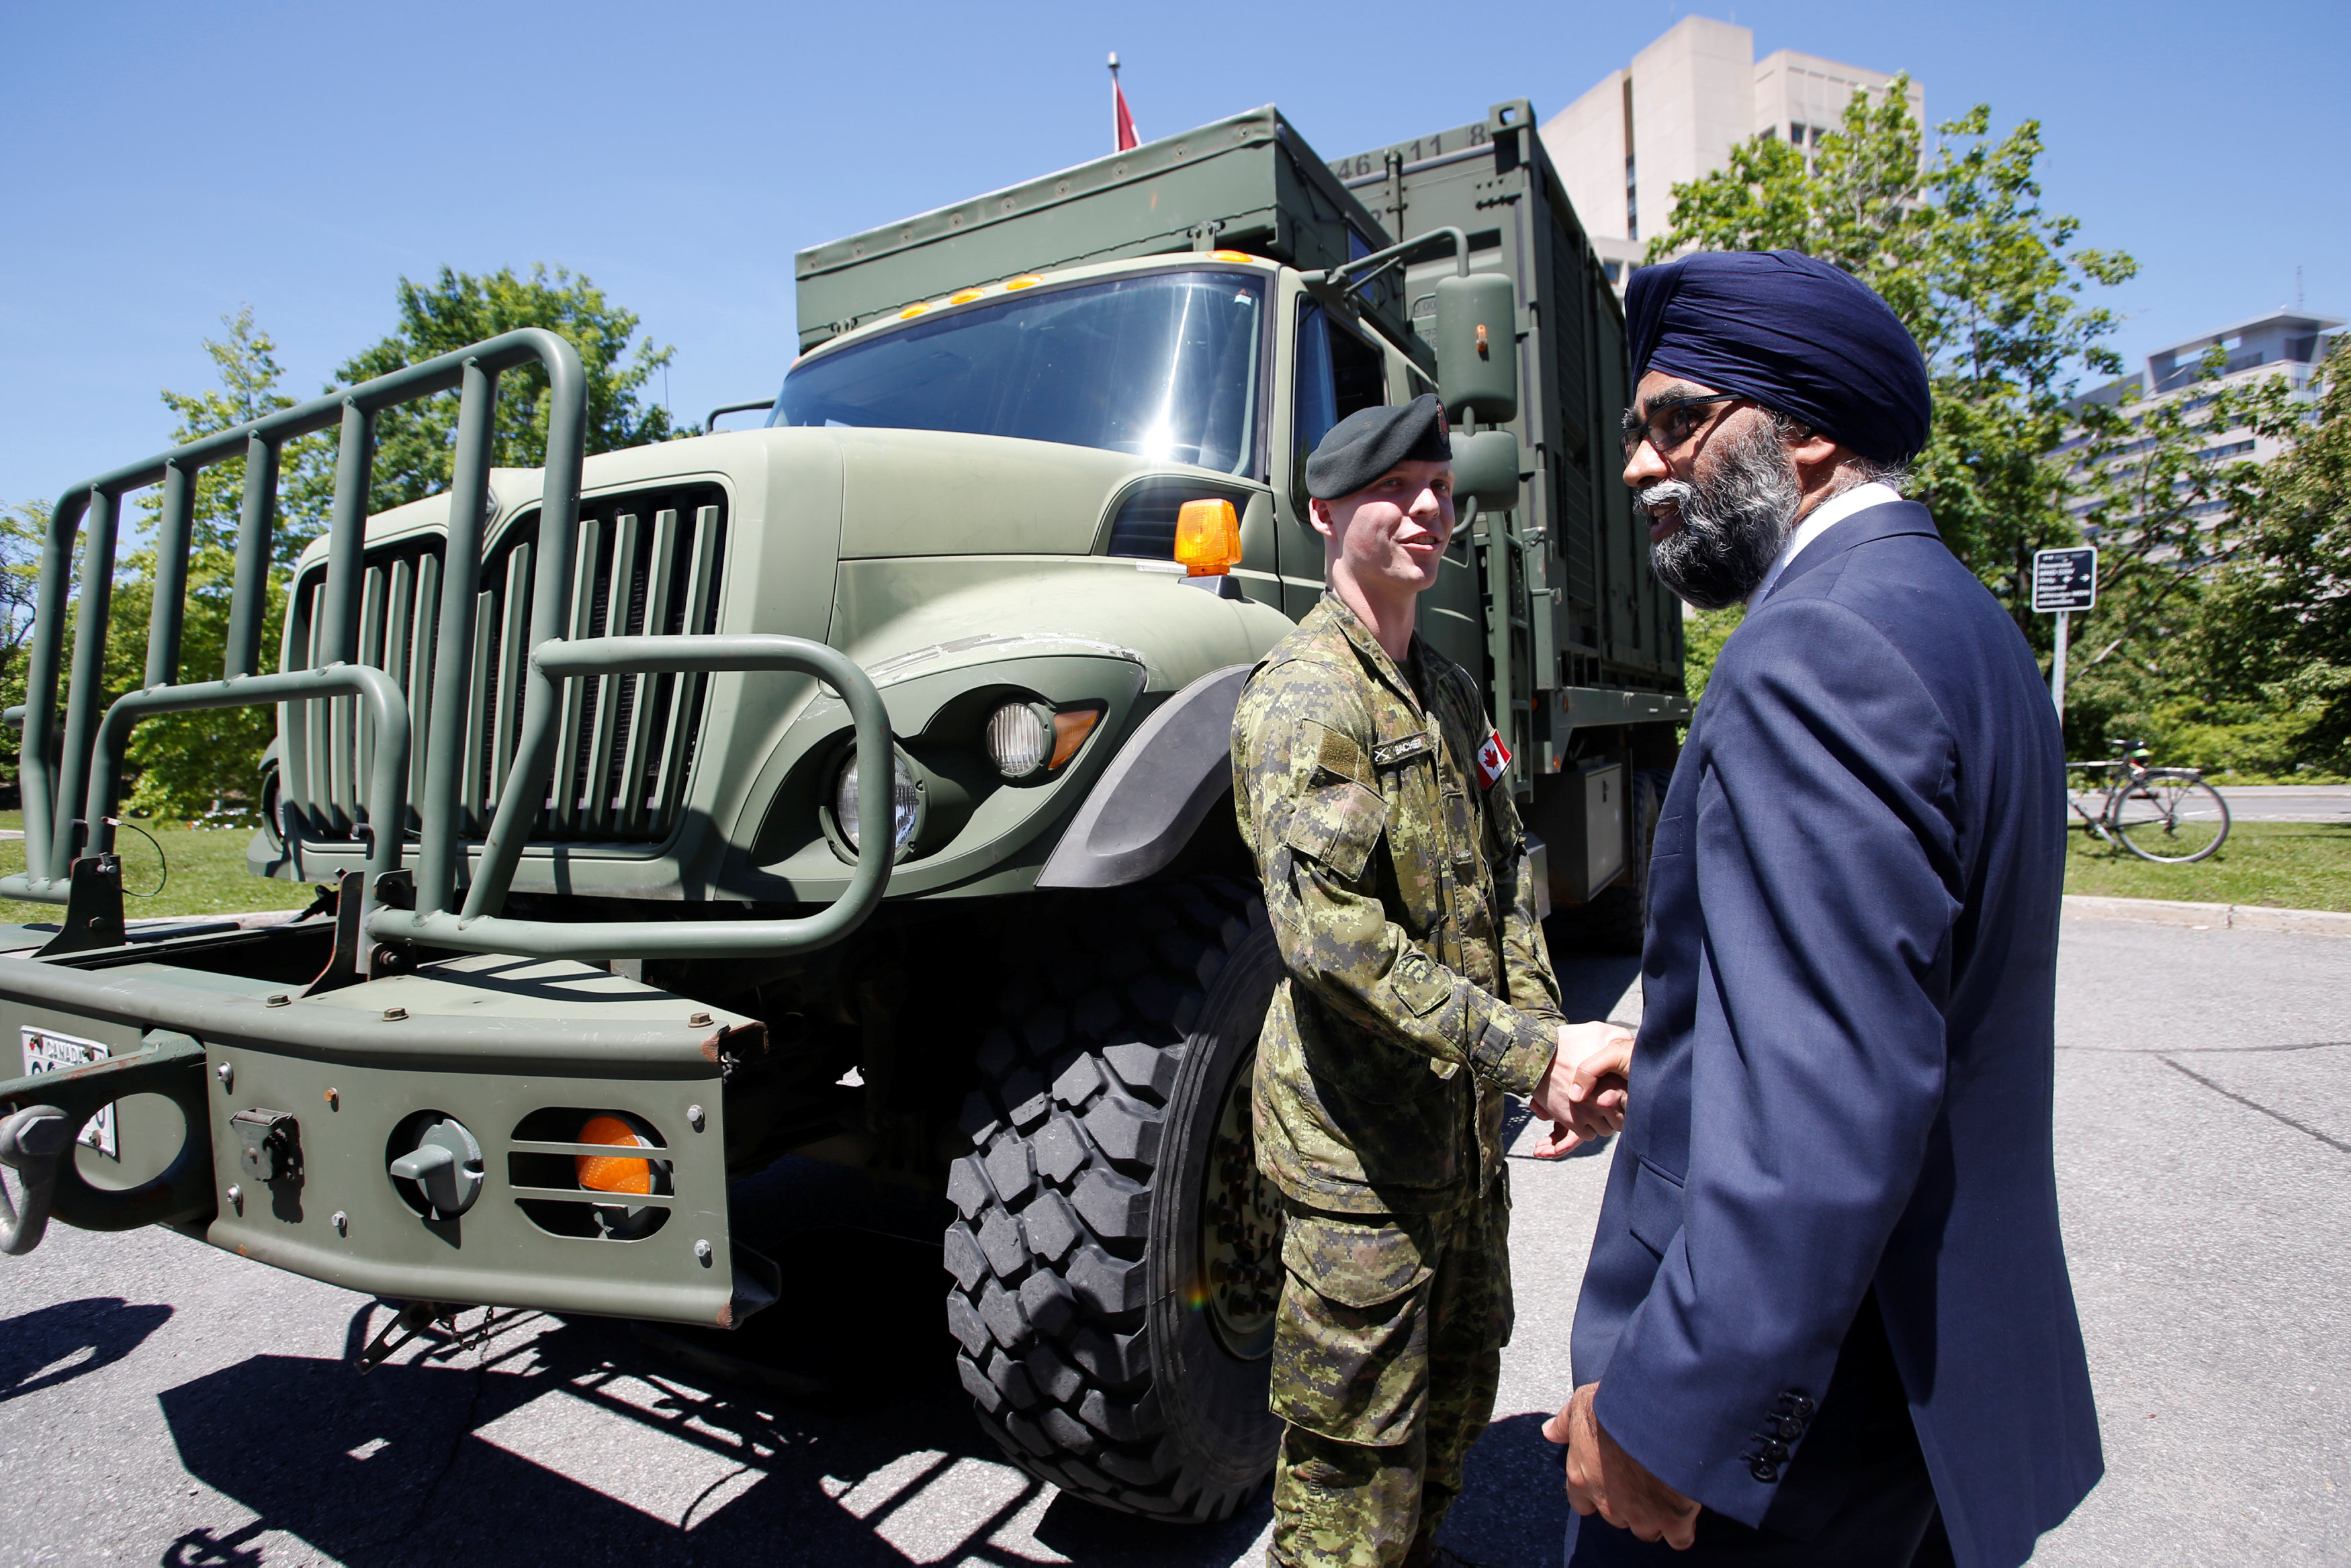 Canada's Defence Minister Harjit Sajjan (R) shakes hands with a Canadian Forces soldier after announcing Canada's new defence policy in Ottawa, Ontario, Canada, June 7, 2017. (Chris Wattie / Reuters)